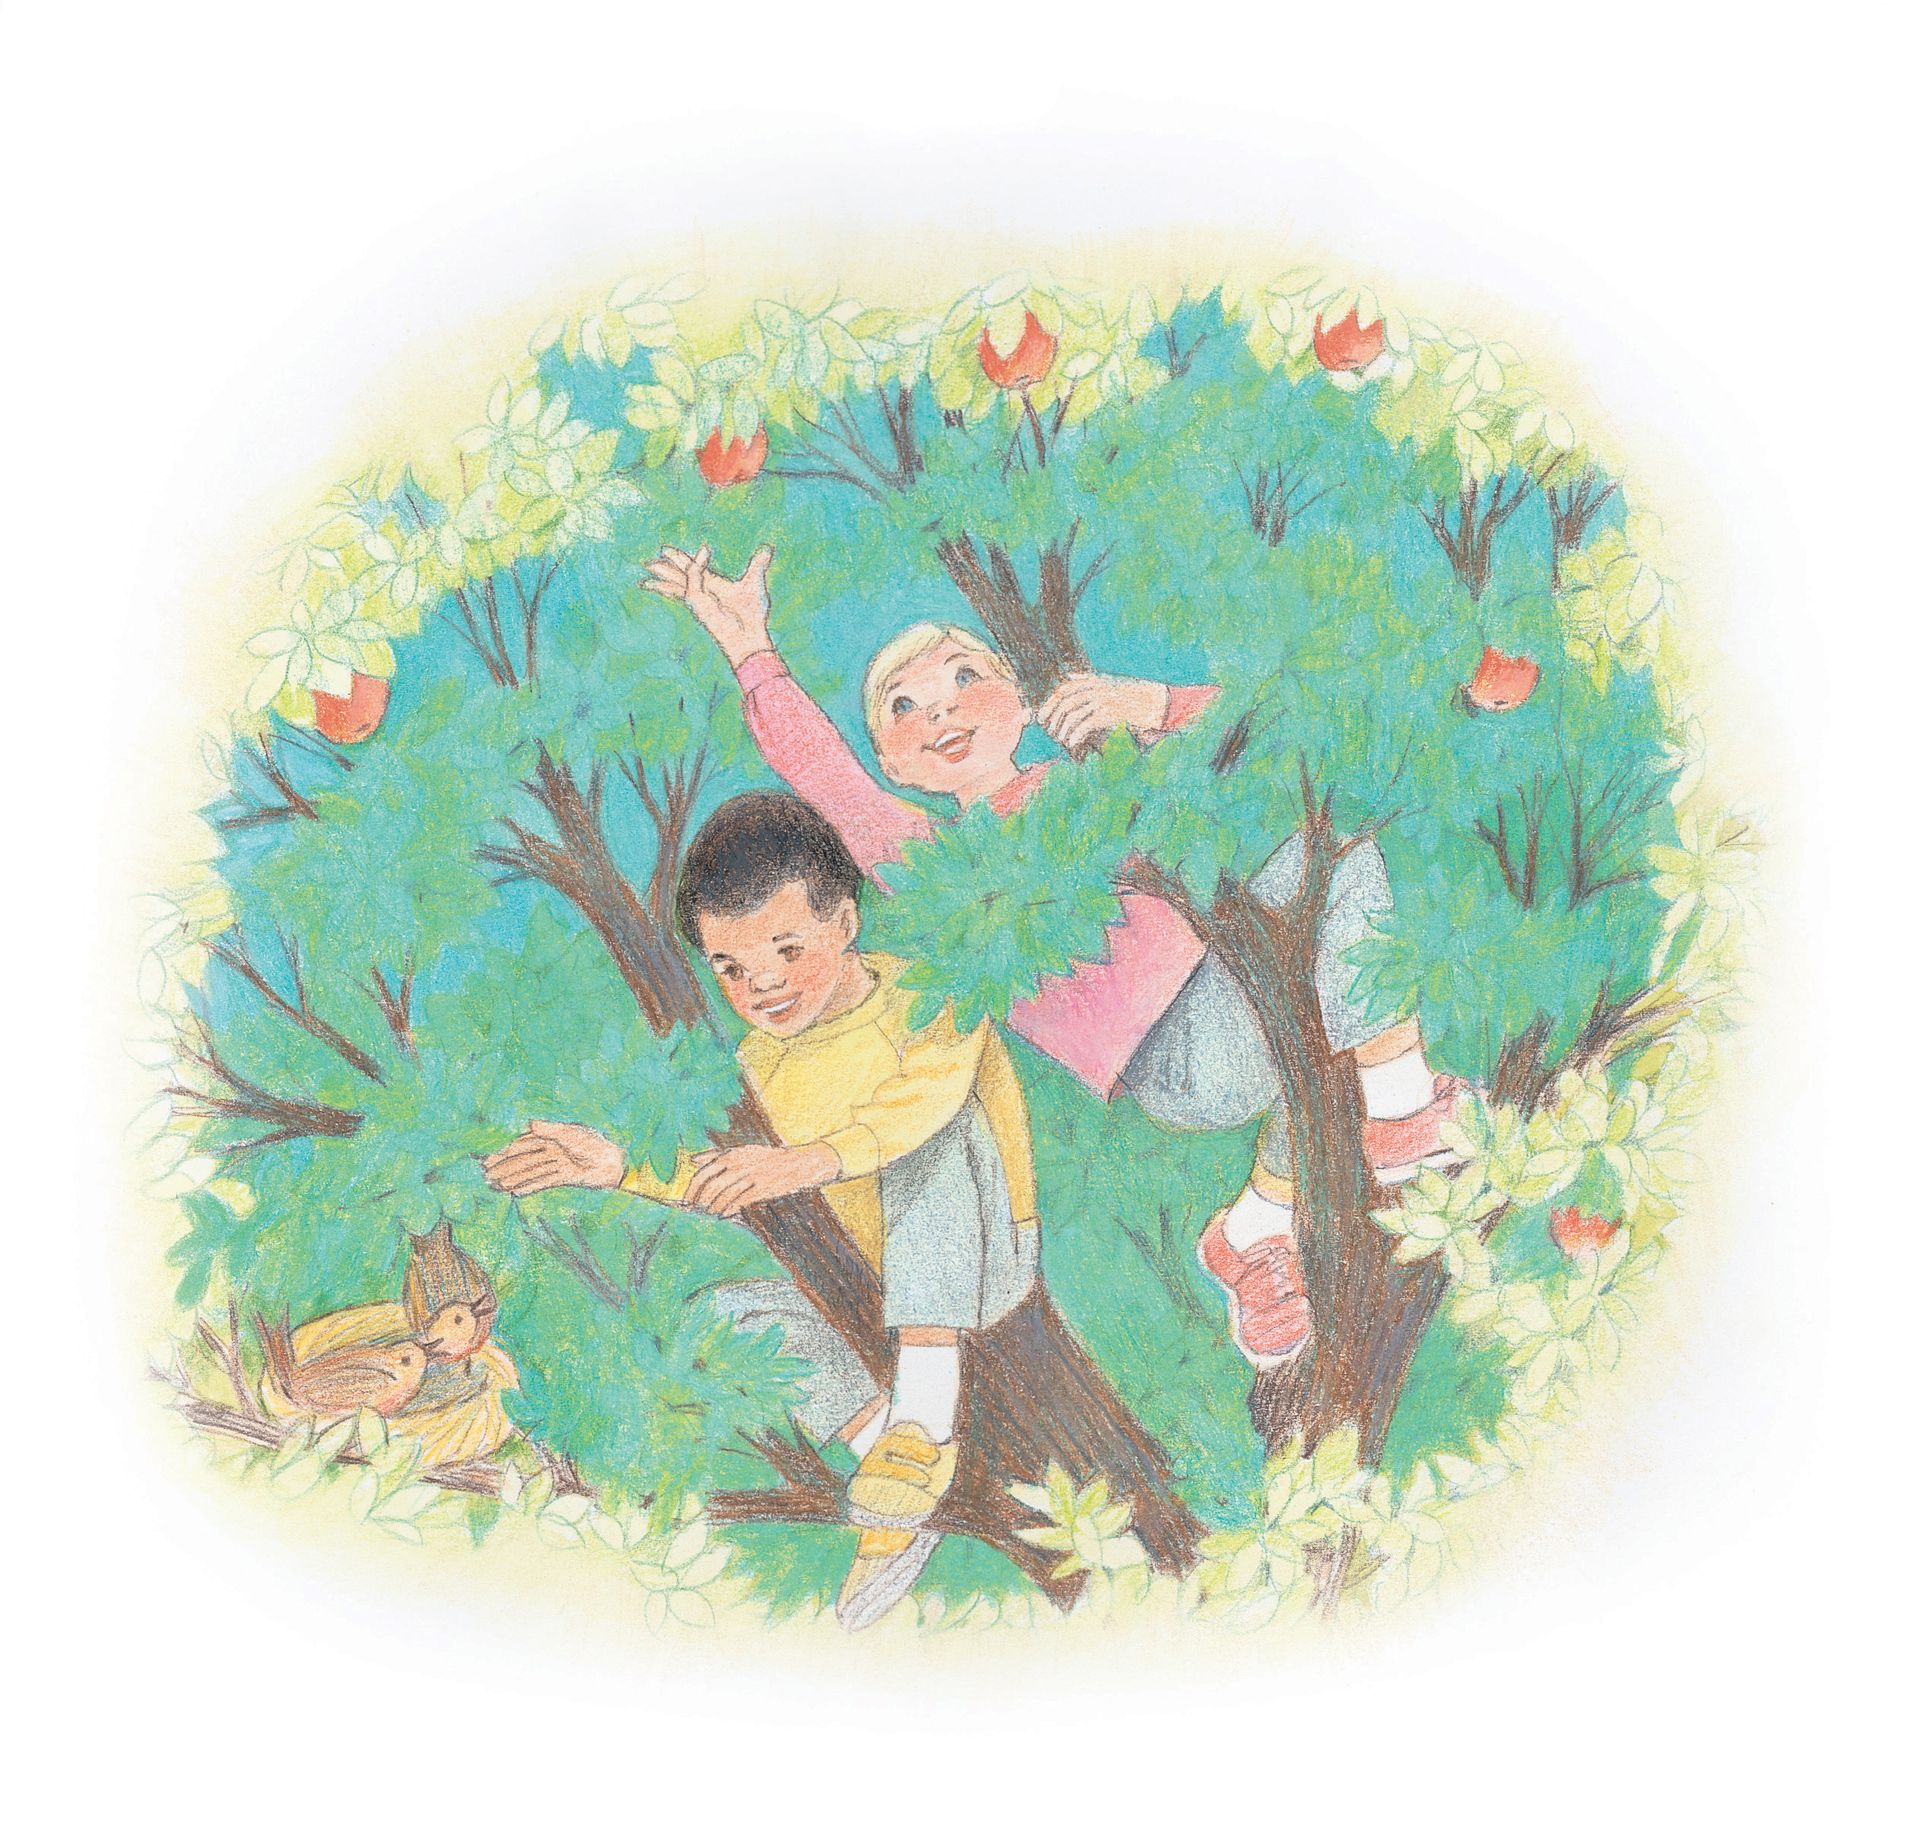 Two children climbing a tree and picking apples. From the Children’s Songbook, page 240, “In the Leafy Treetops”; watercolor illustration by Virginia Sargent.